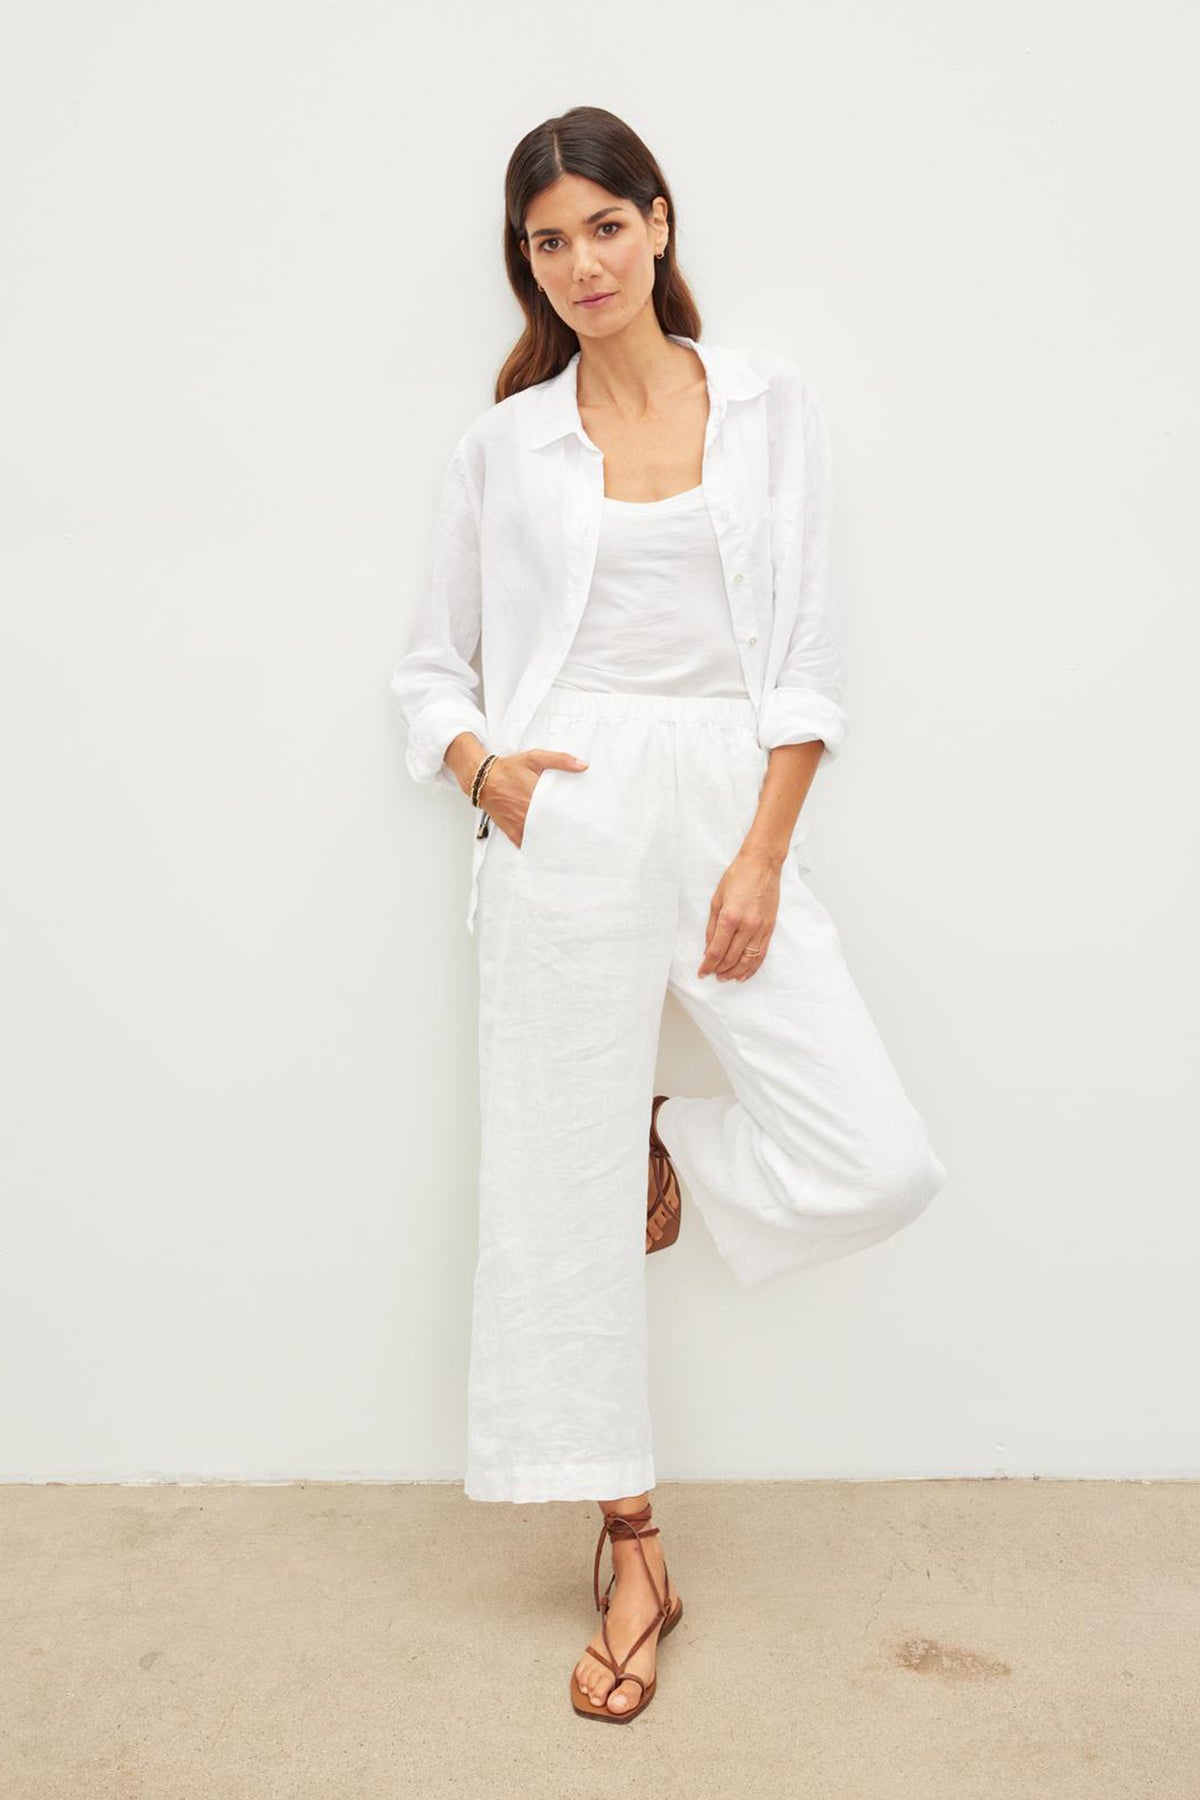 Woman in a white button-up shirt, white tank top, and Velvet by Graham & Spencer LOLA LINEN PANT stands against a plain wall. She is wearing brown sandals and has one hand in her pocket.-36161692631233